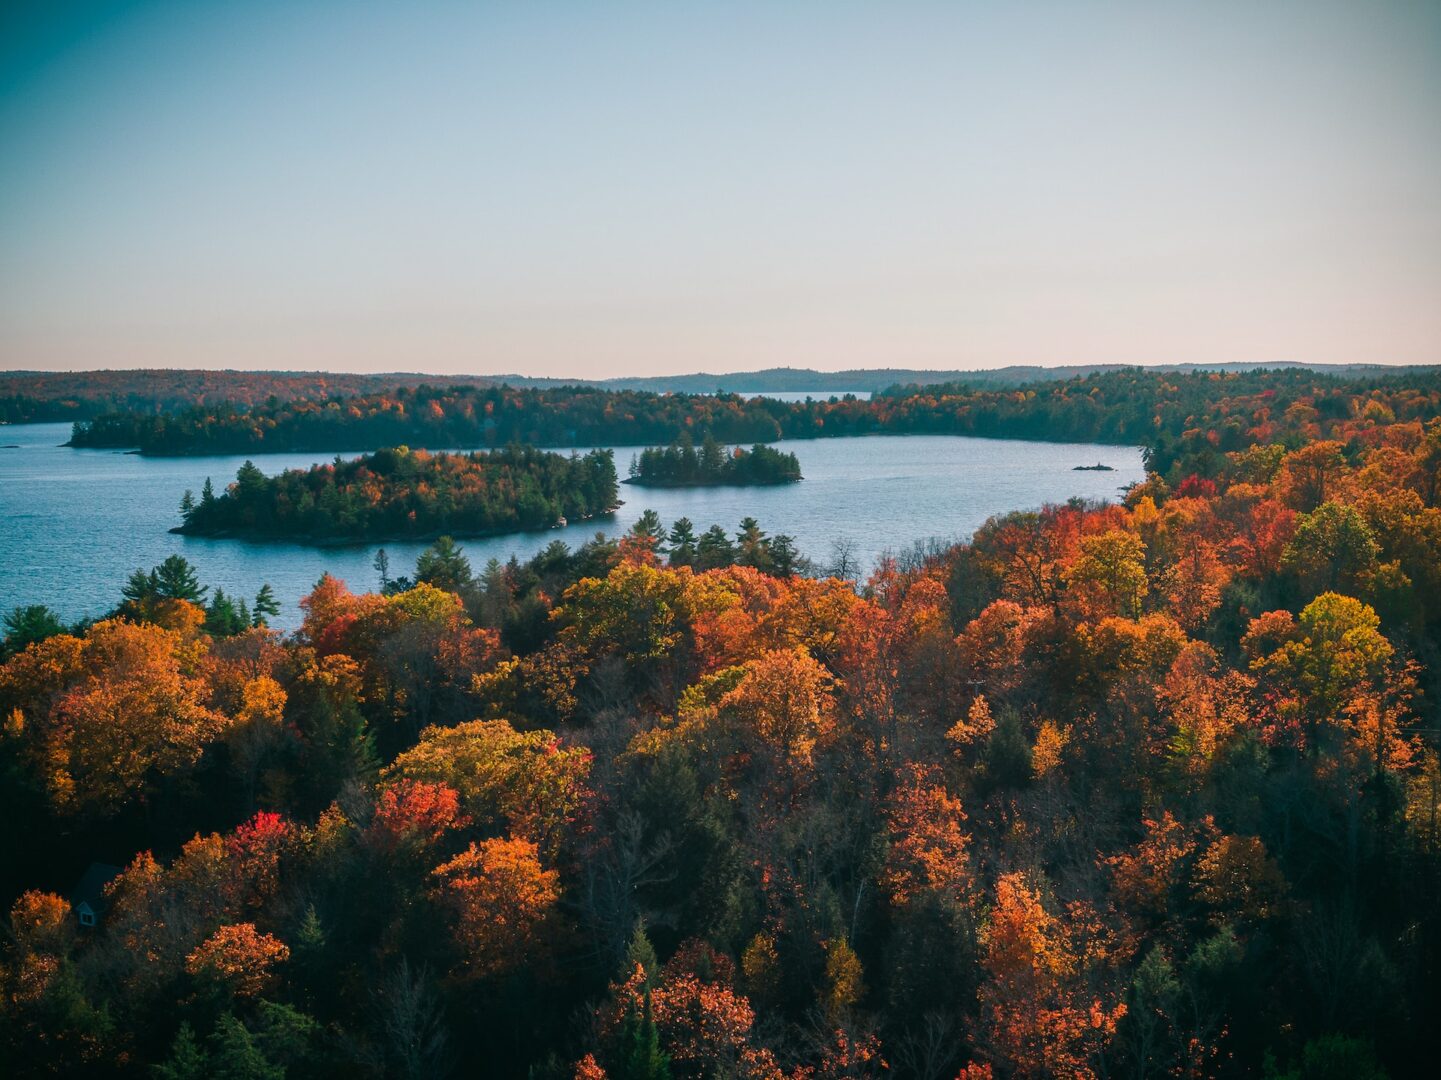 Colourful fall forest in Ontario with blue lake in background.